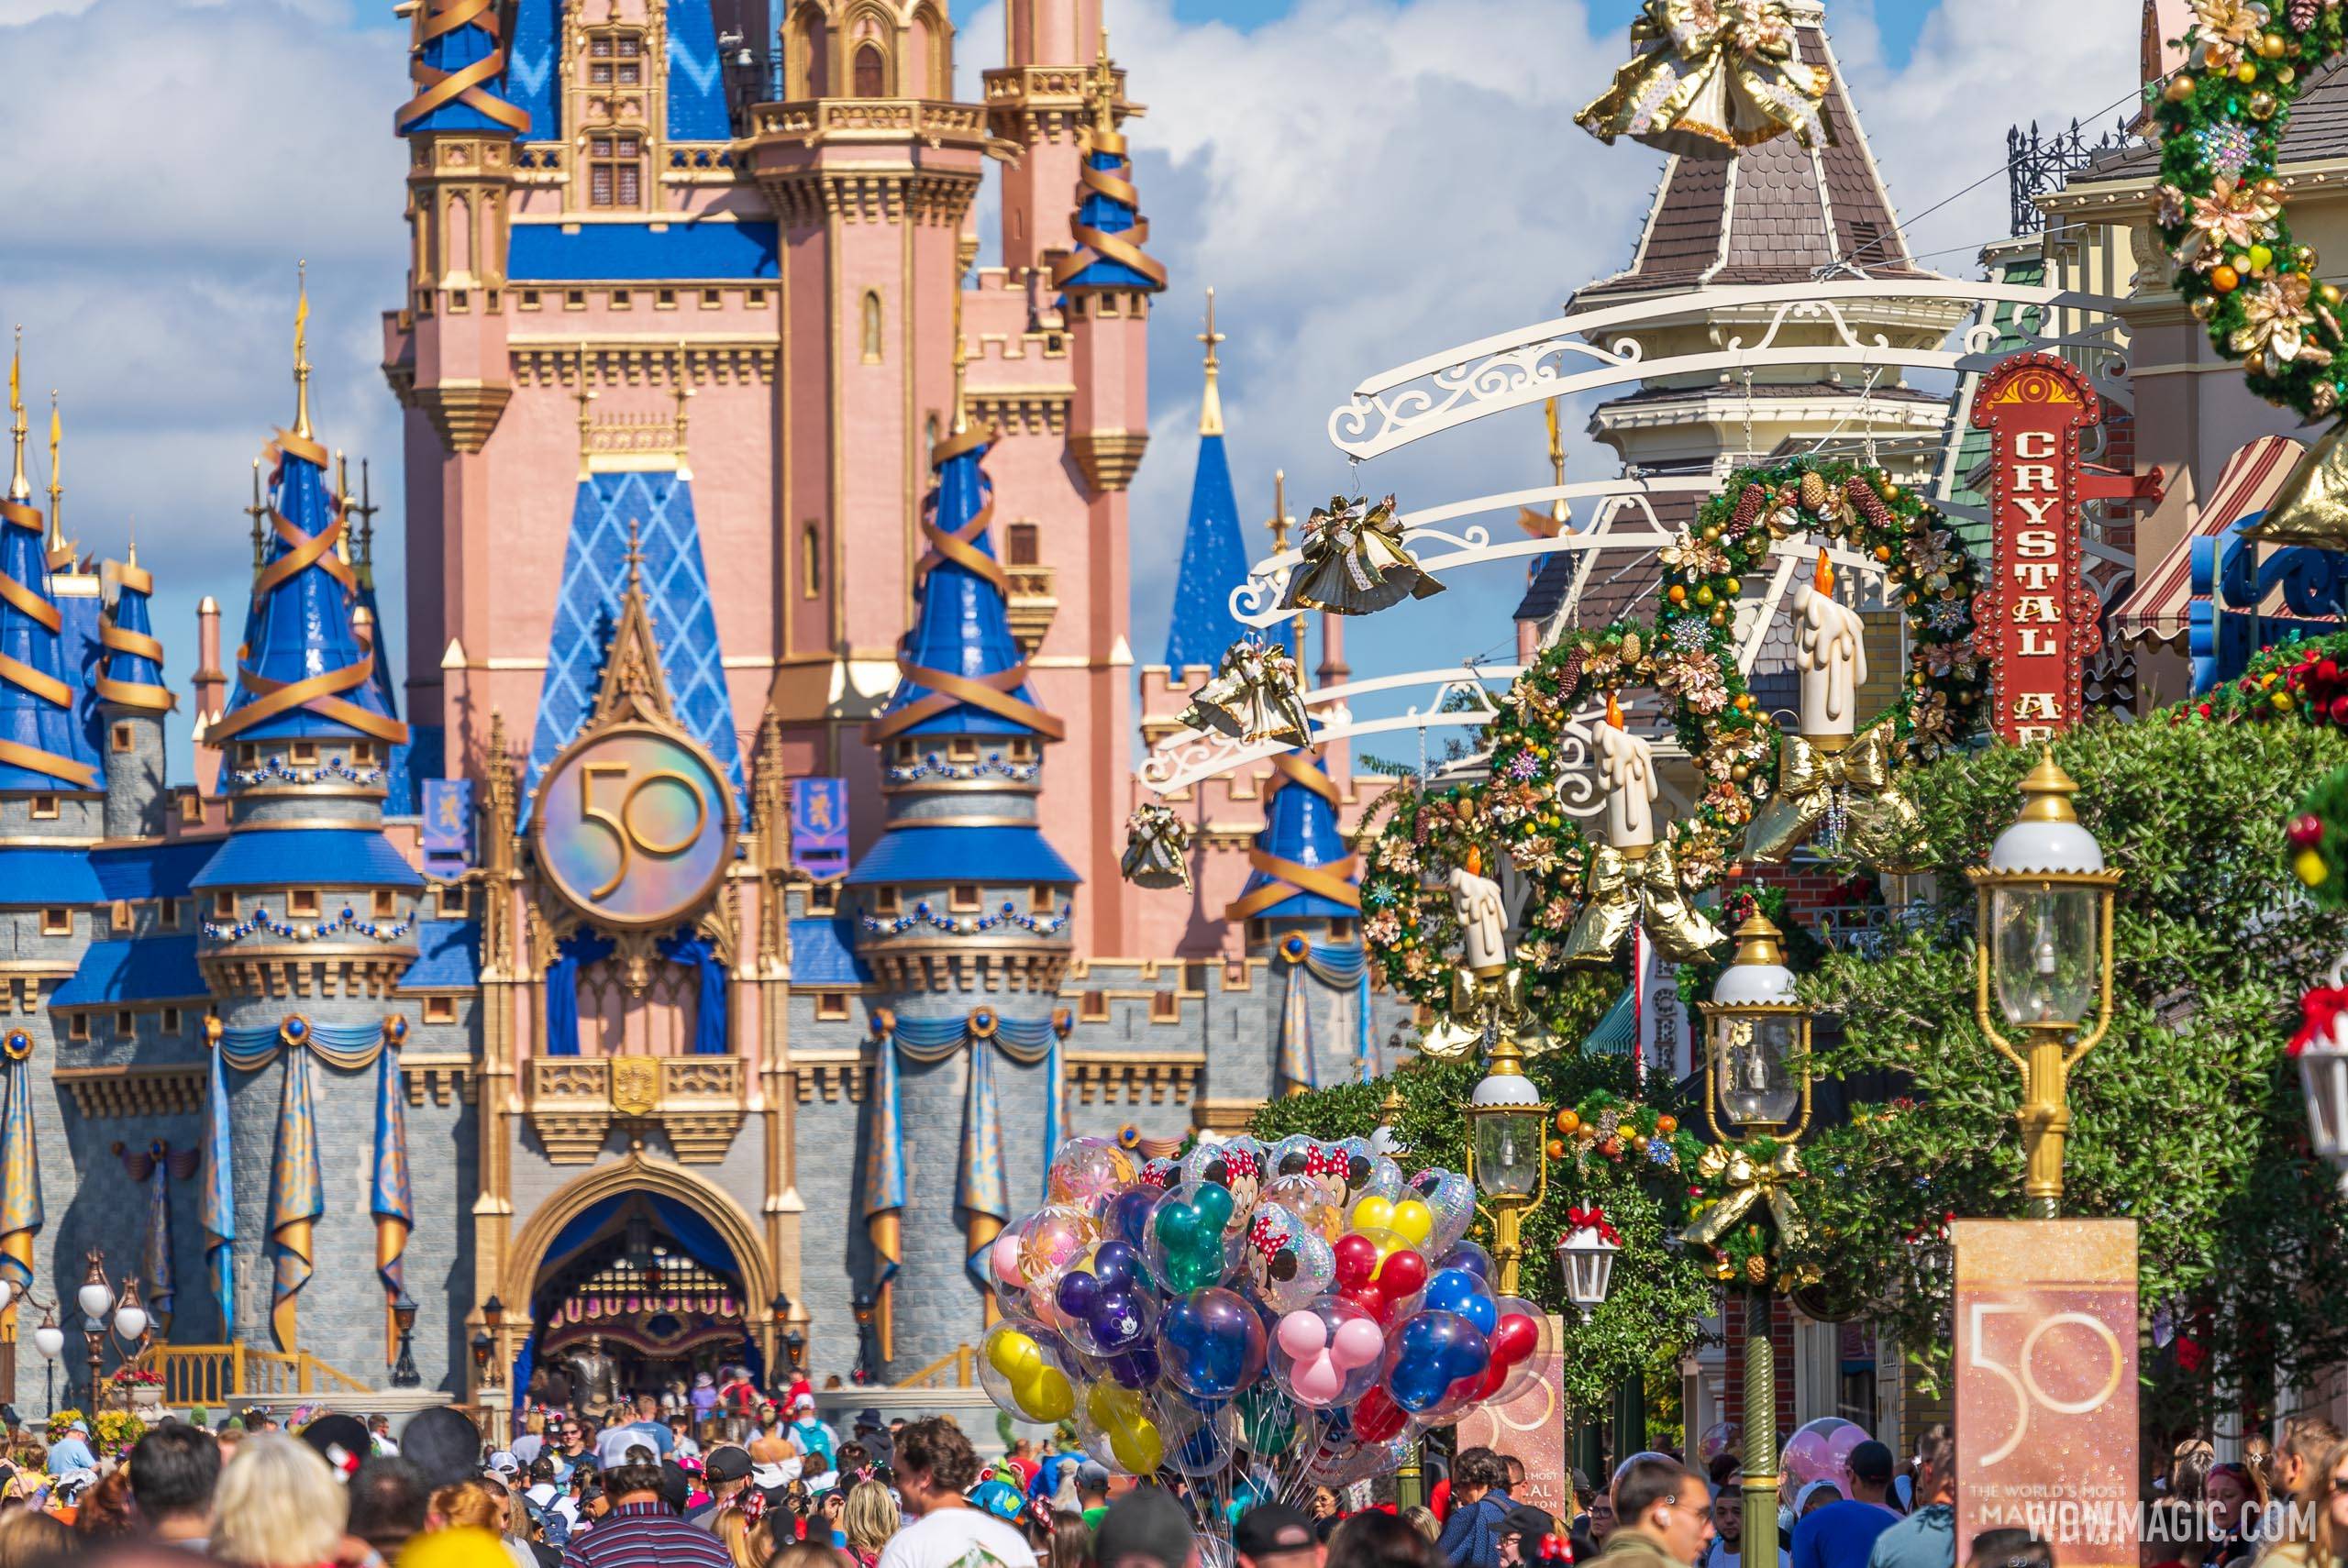 Walt Disney World operating hours are now available through February 1 2022